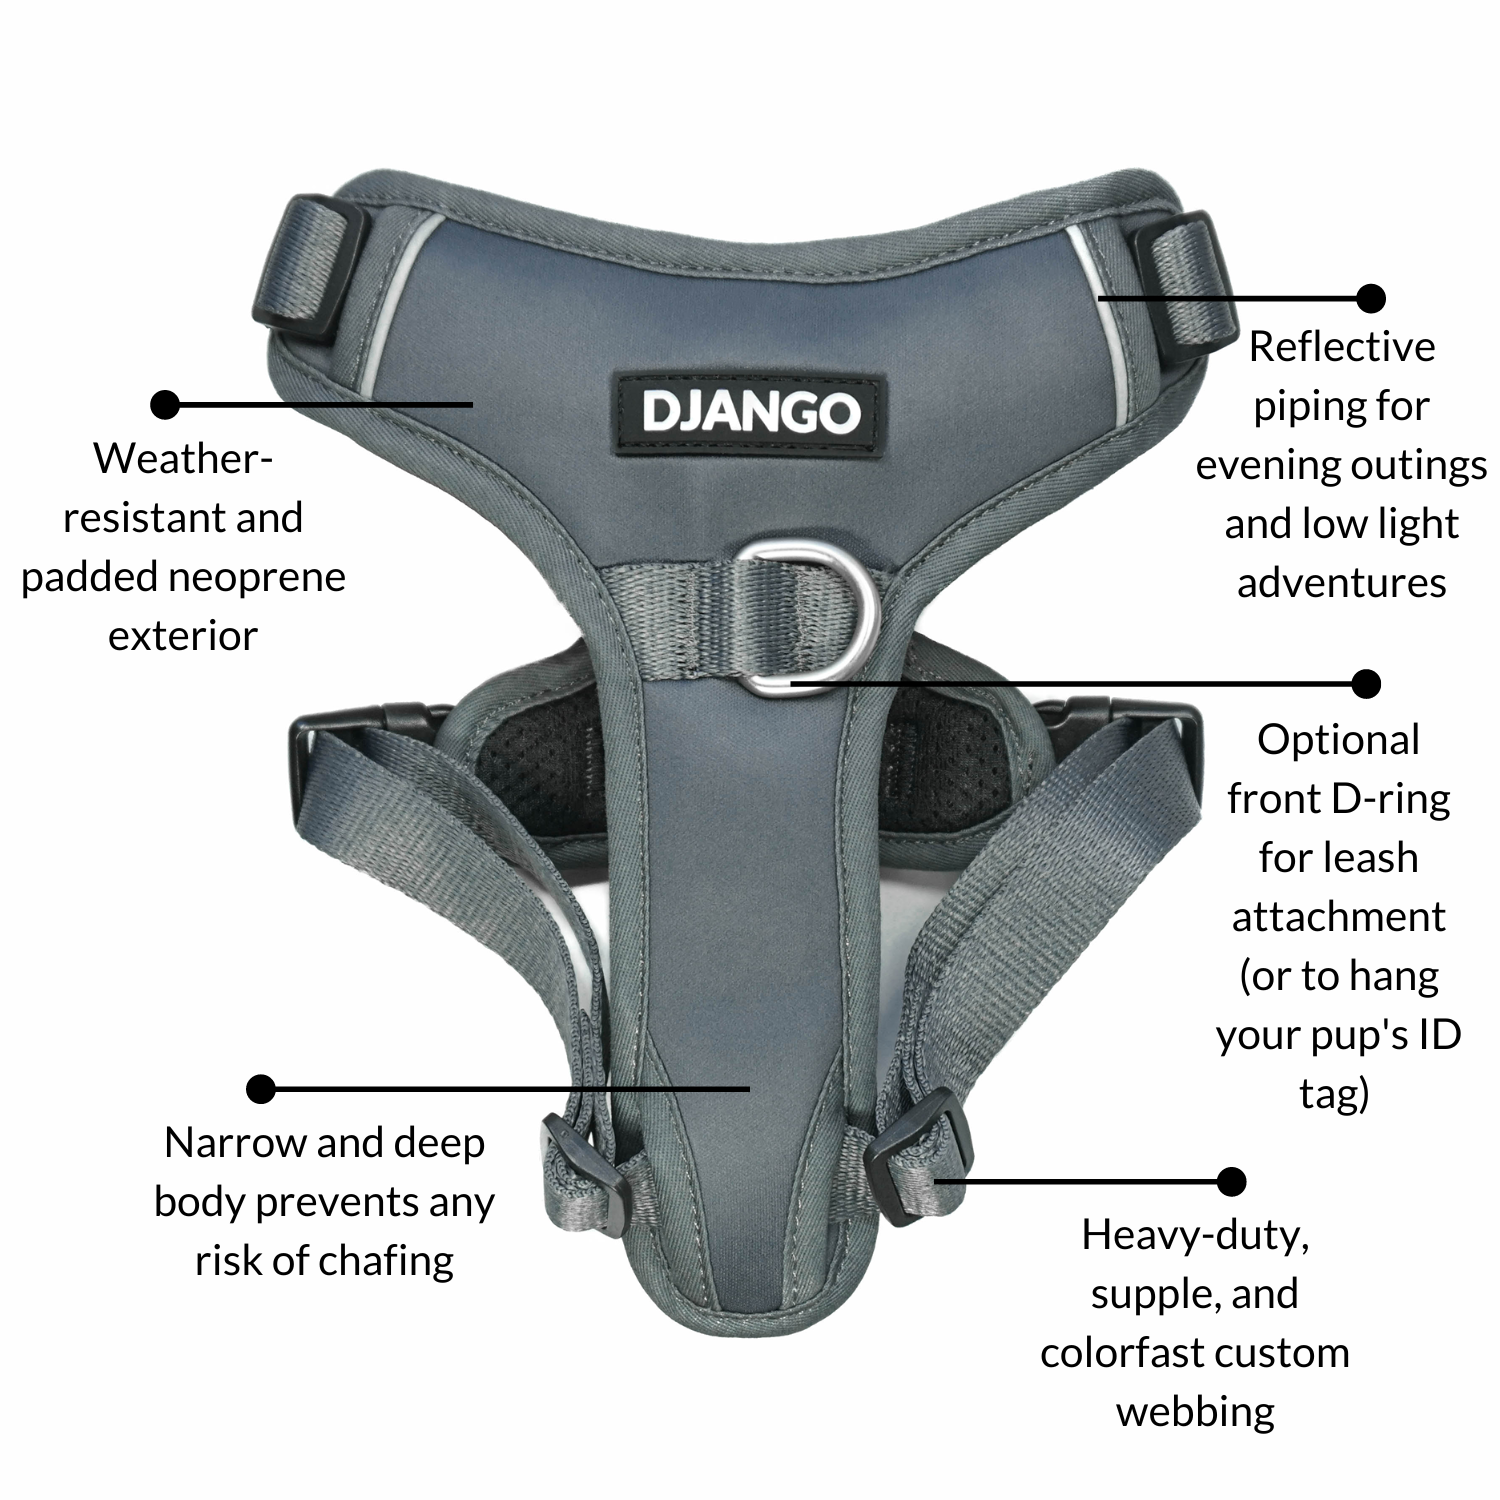 DJANGO Tahoe No Pull Dog Harness in Poppy Seed Gray - Key features include a weather-resistant and padded neoprene exterior, a narrow and deep harness body (to prevent the risk of chafing) reflective piping, and soft webbing. - djangobrand.com